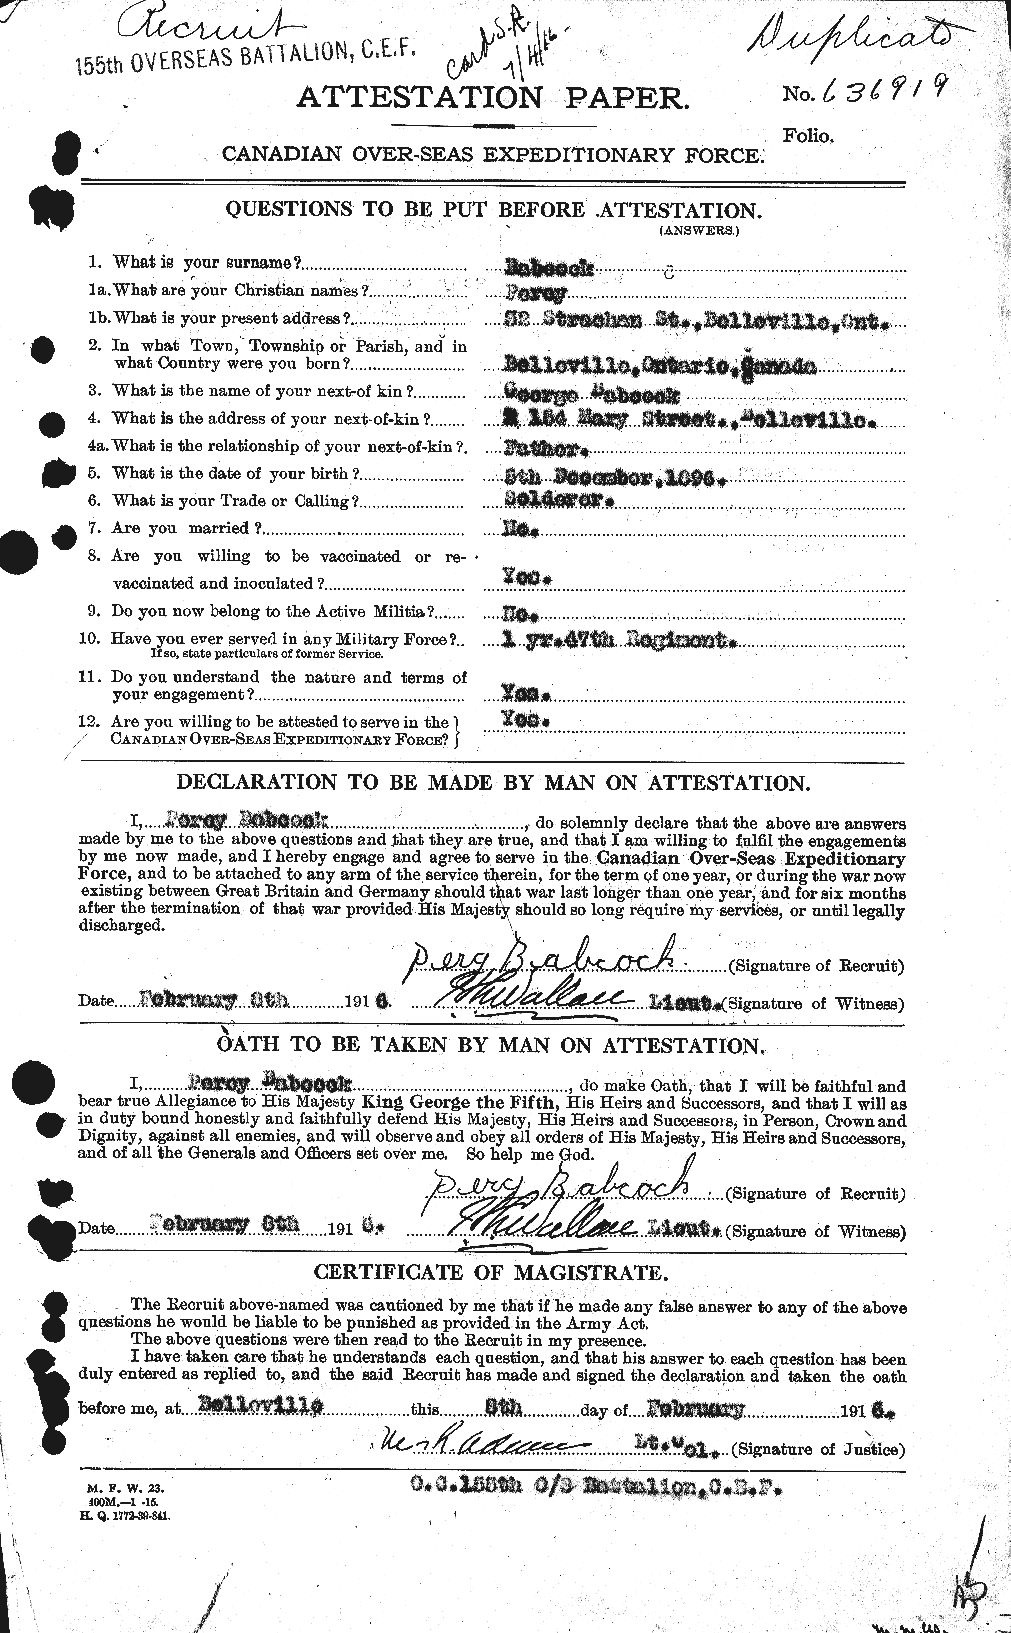 Personnel Records of the First World War - CEF 218212a